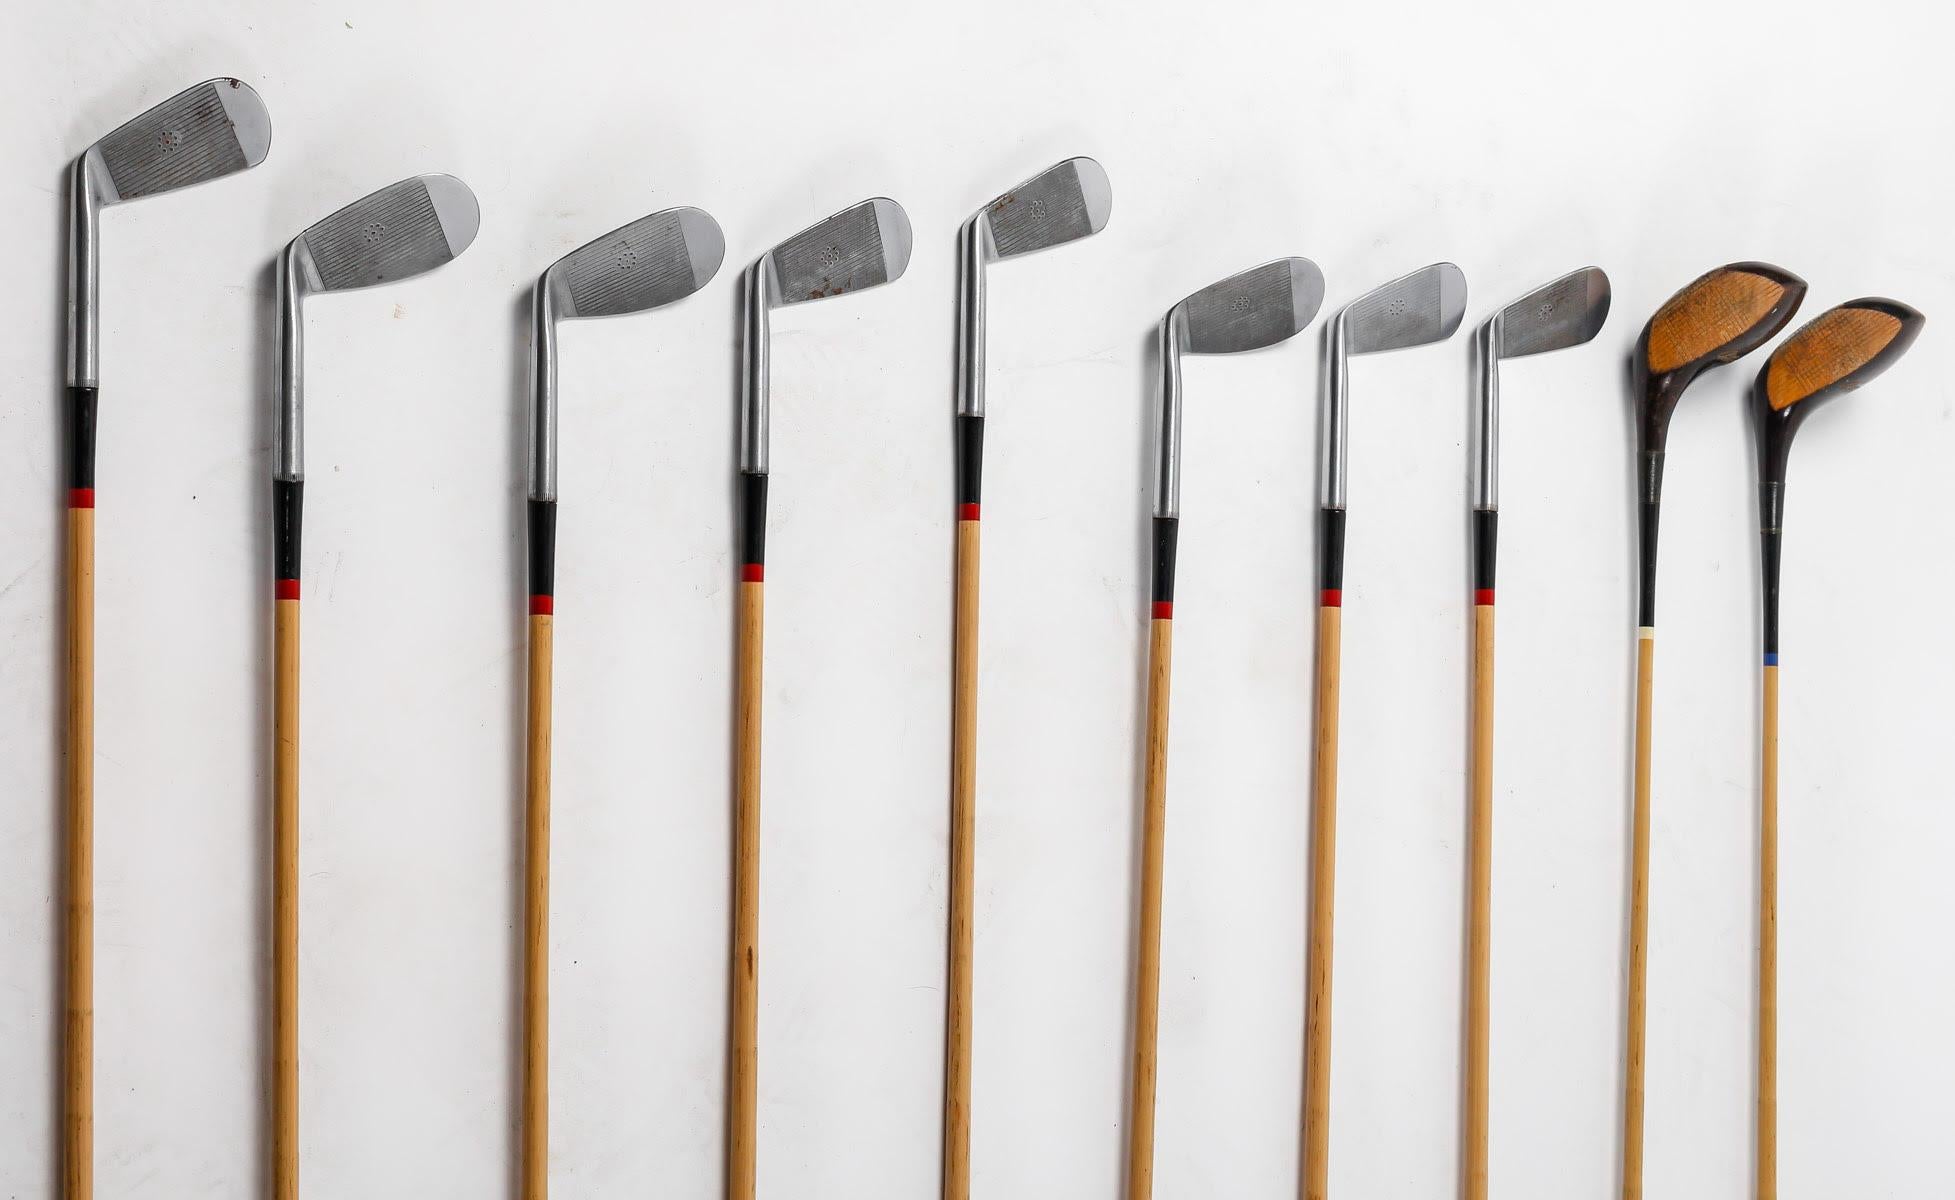 Suite of 10 1930s Golf Clubs.

Suite of 10 vintage golf clubs, wooden handles, from the 1930s, including 8 iron and 2 wood.

Dimensions each: h: 105cm, w: 10cm, d: 7cm